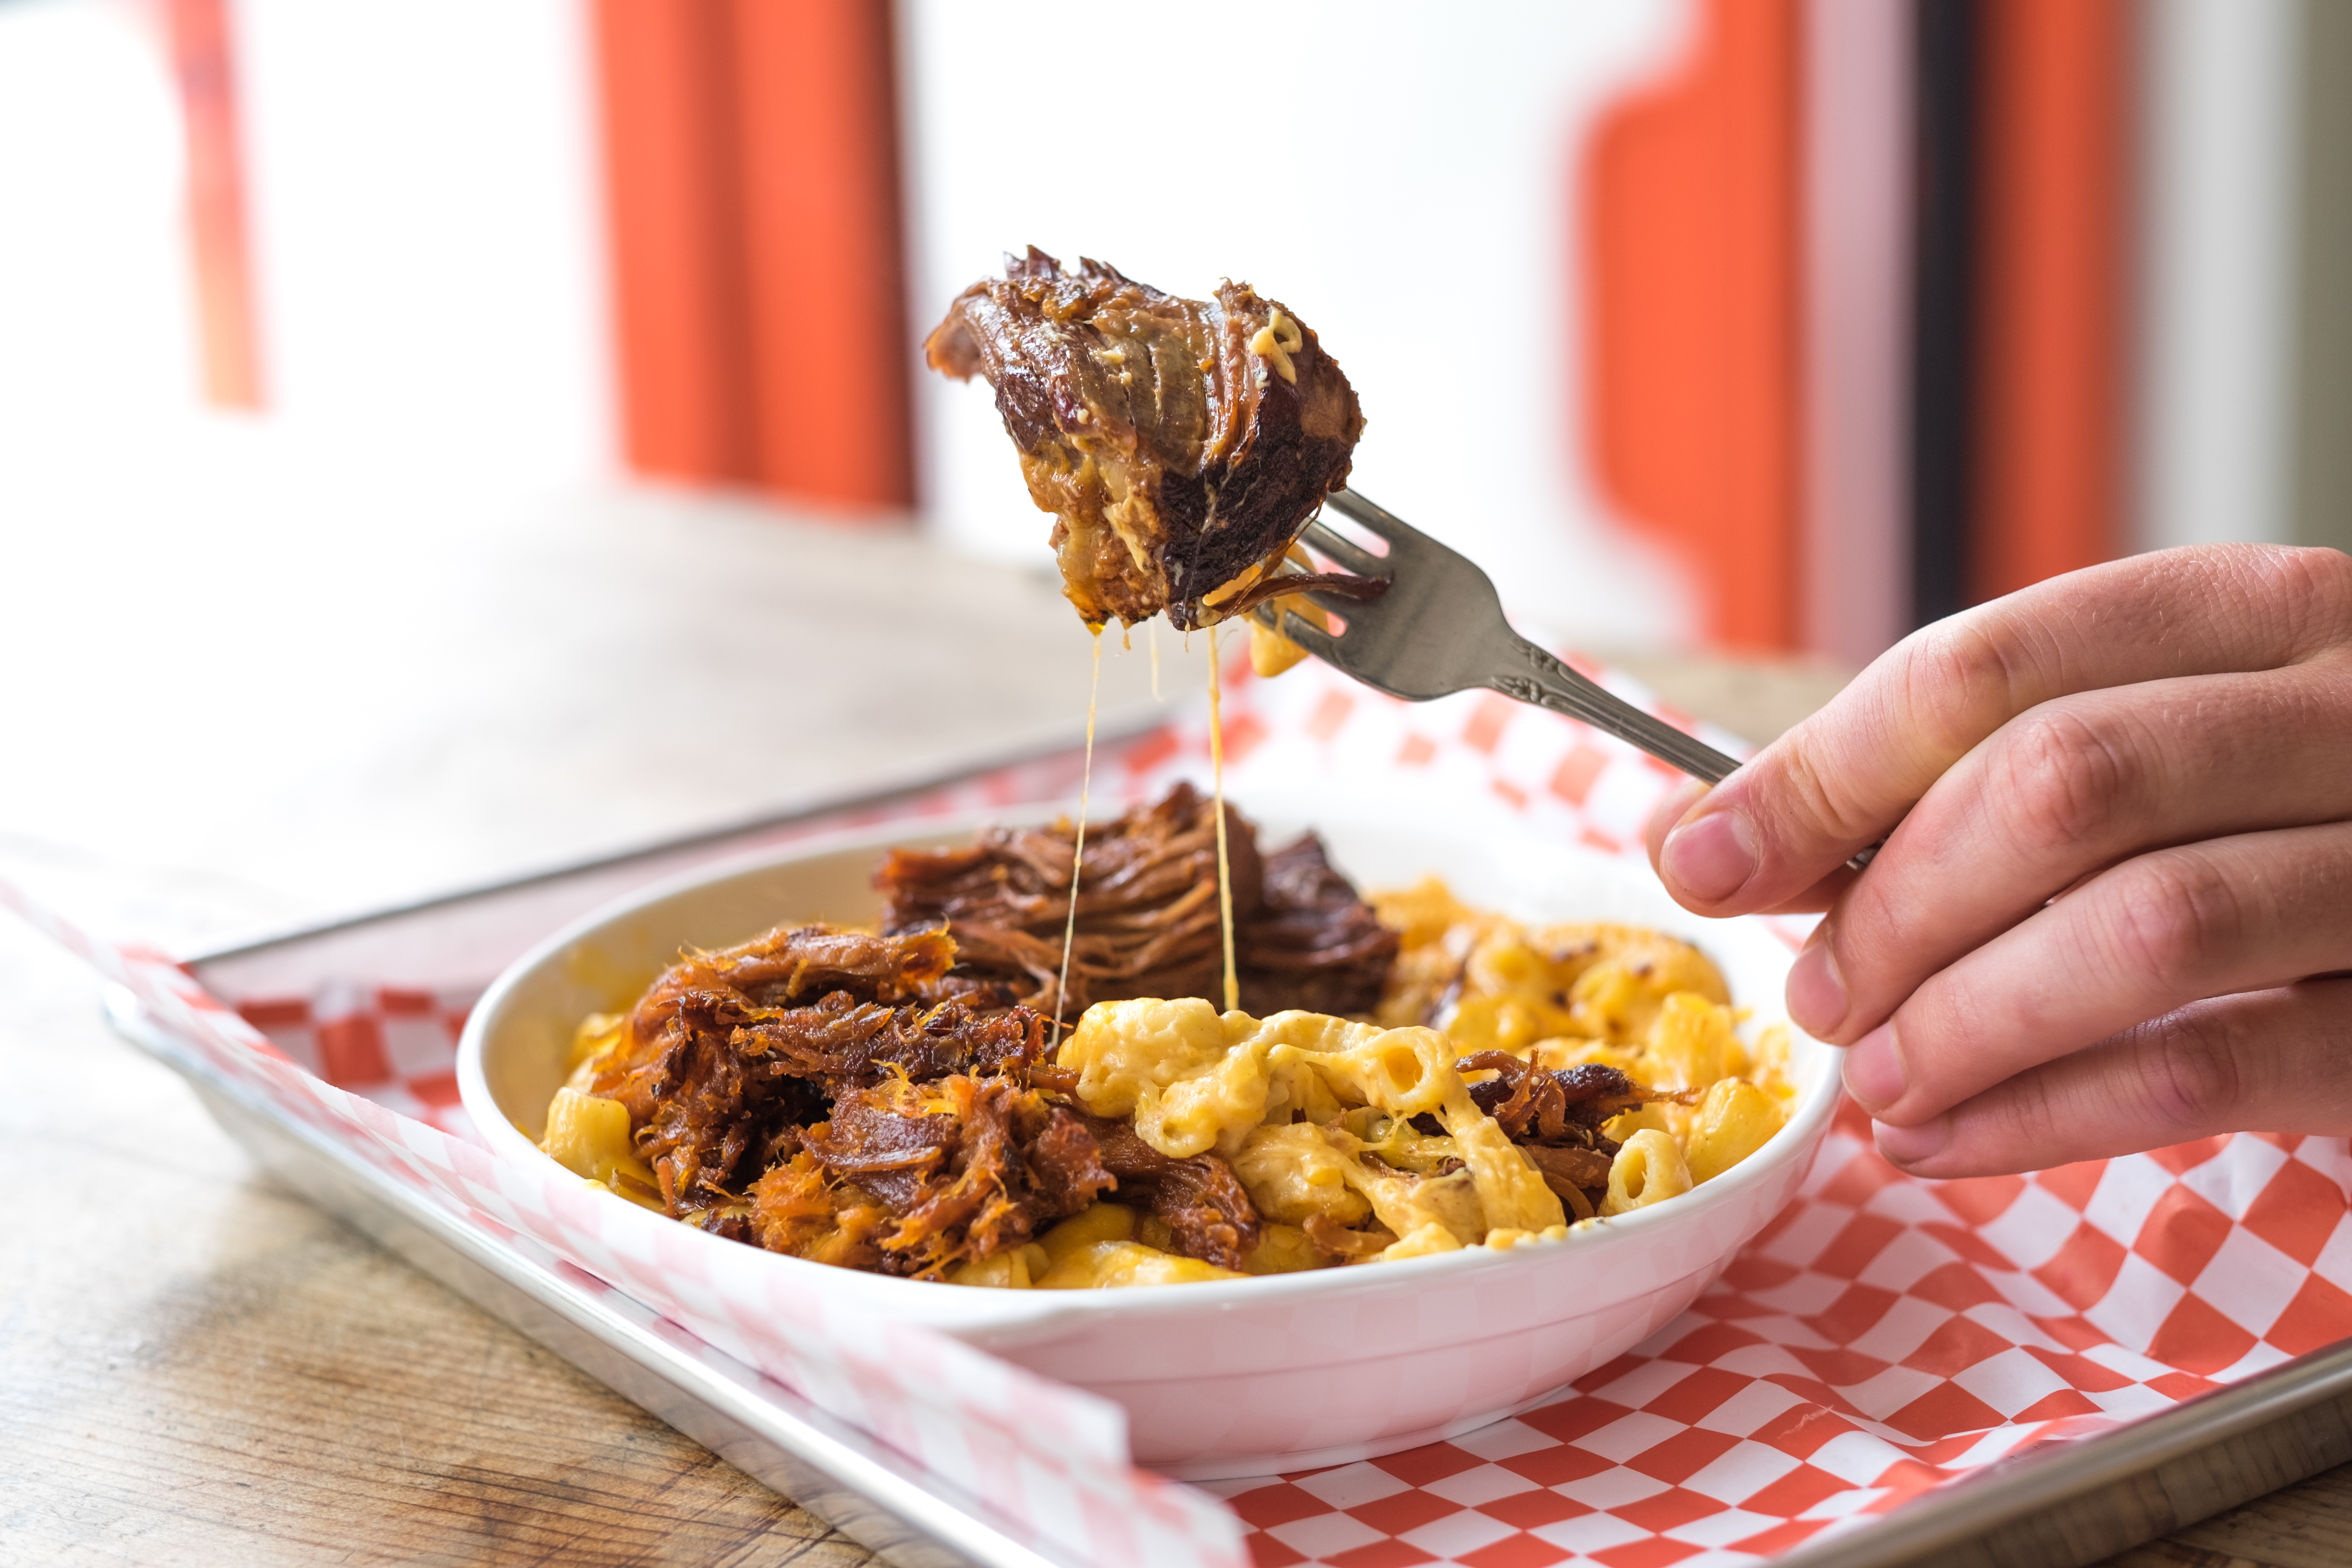 A fork holds up a hulking piece of brisket above a bowl of cheesy noodles and meat, sitting on a red-and-white-checkered paper on a metal tray